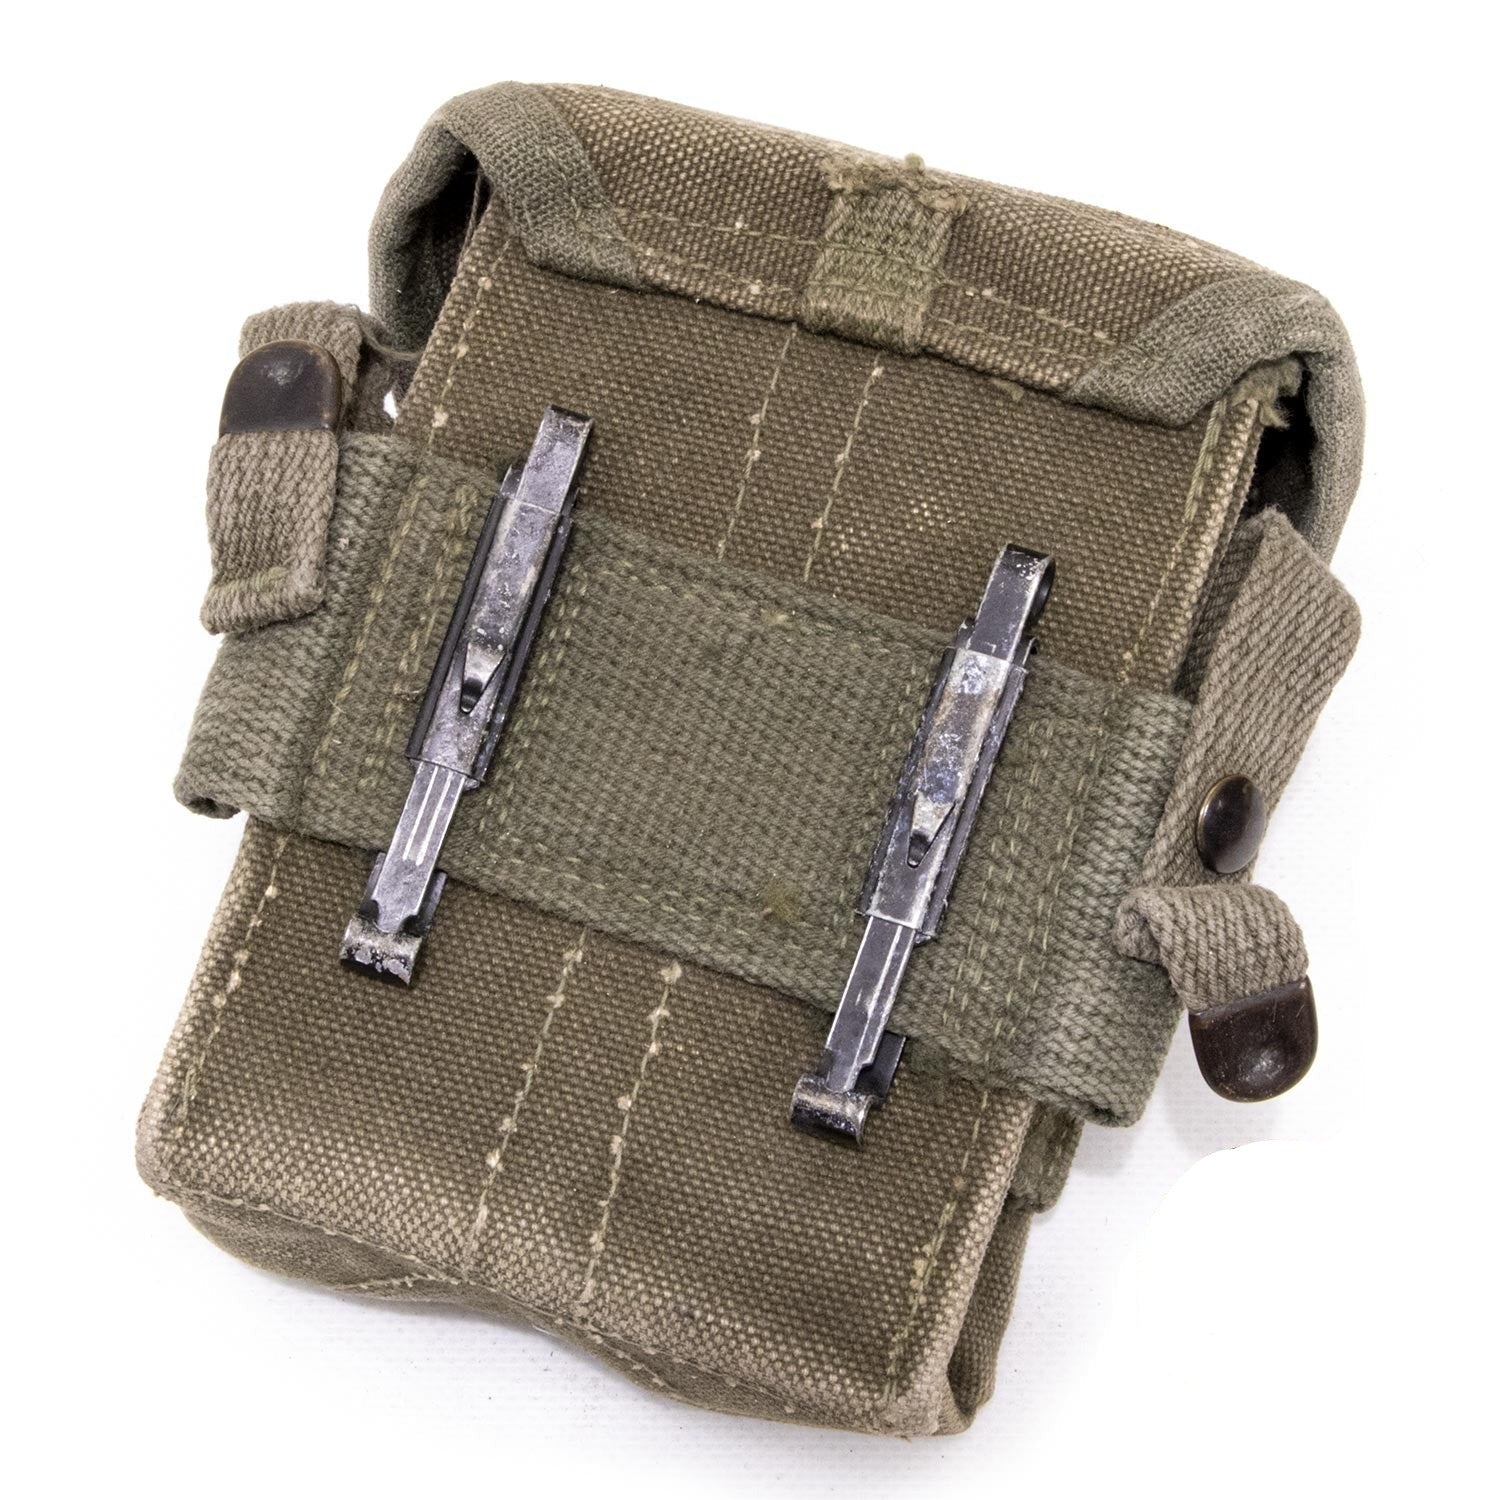 M1956 Universal Small Arms Ammunition Pouch 2-2